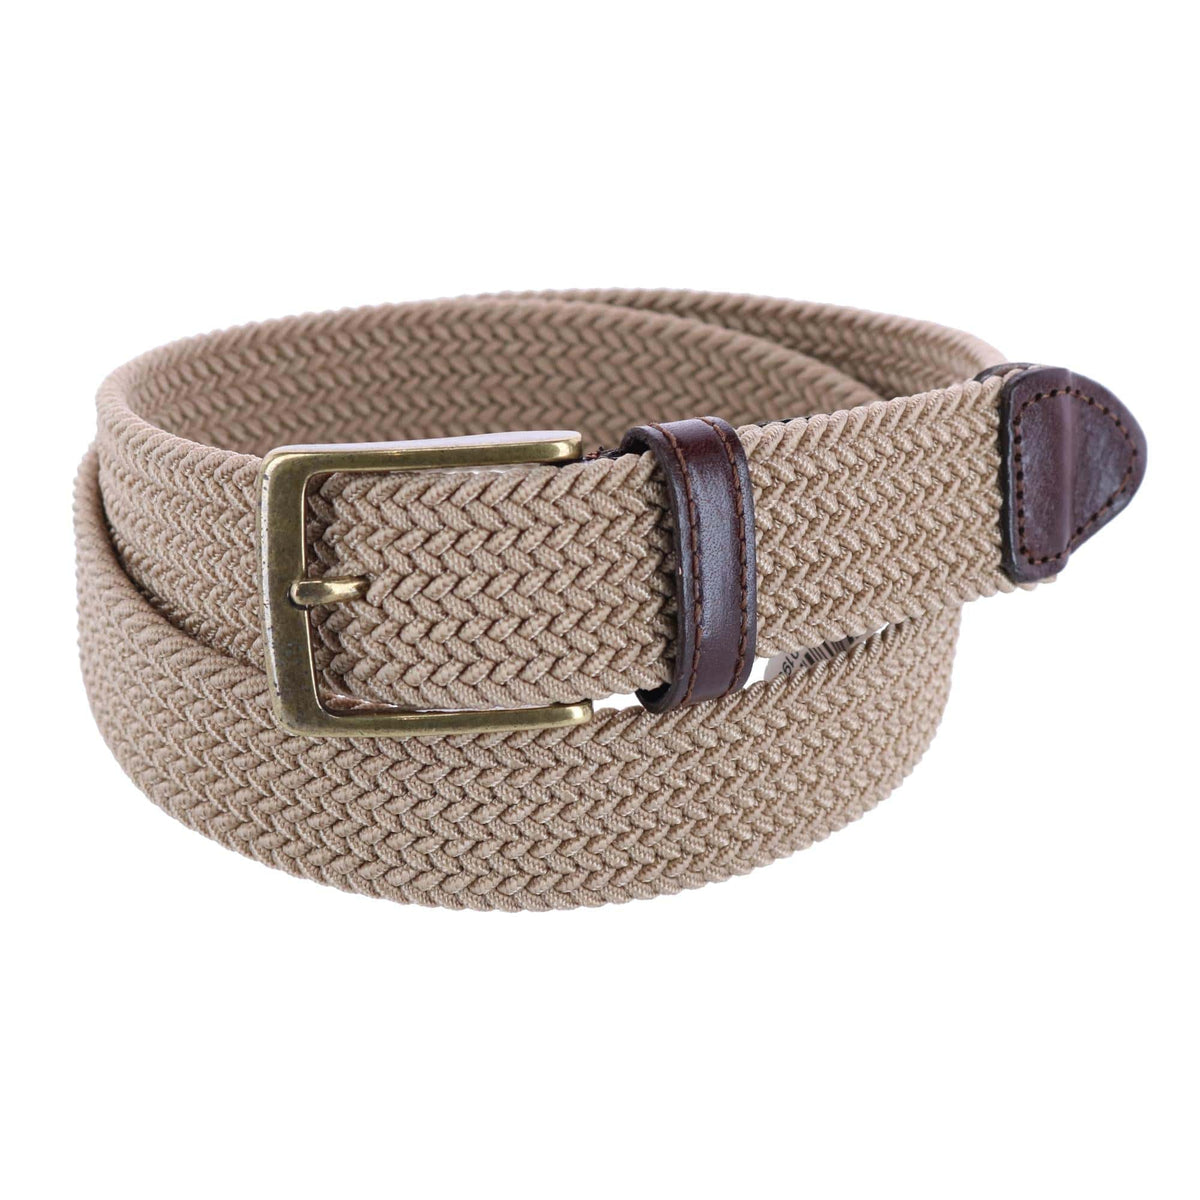 Men's Elastic Braided Stretch Belt with Leather Tabs by Dockers ...